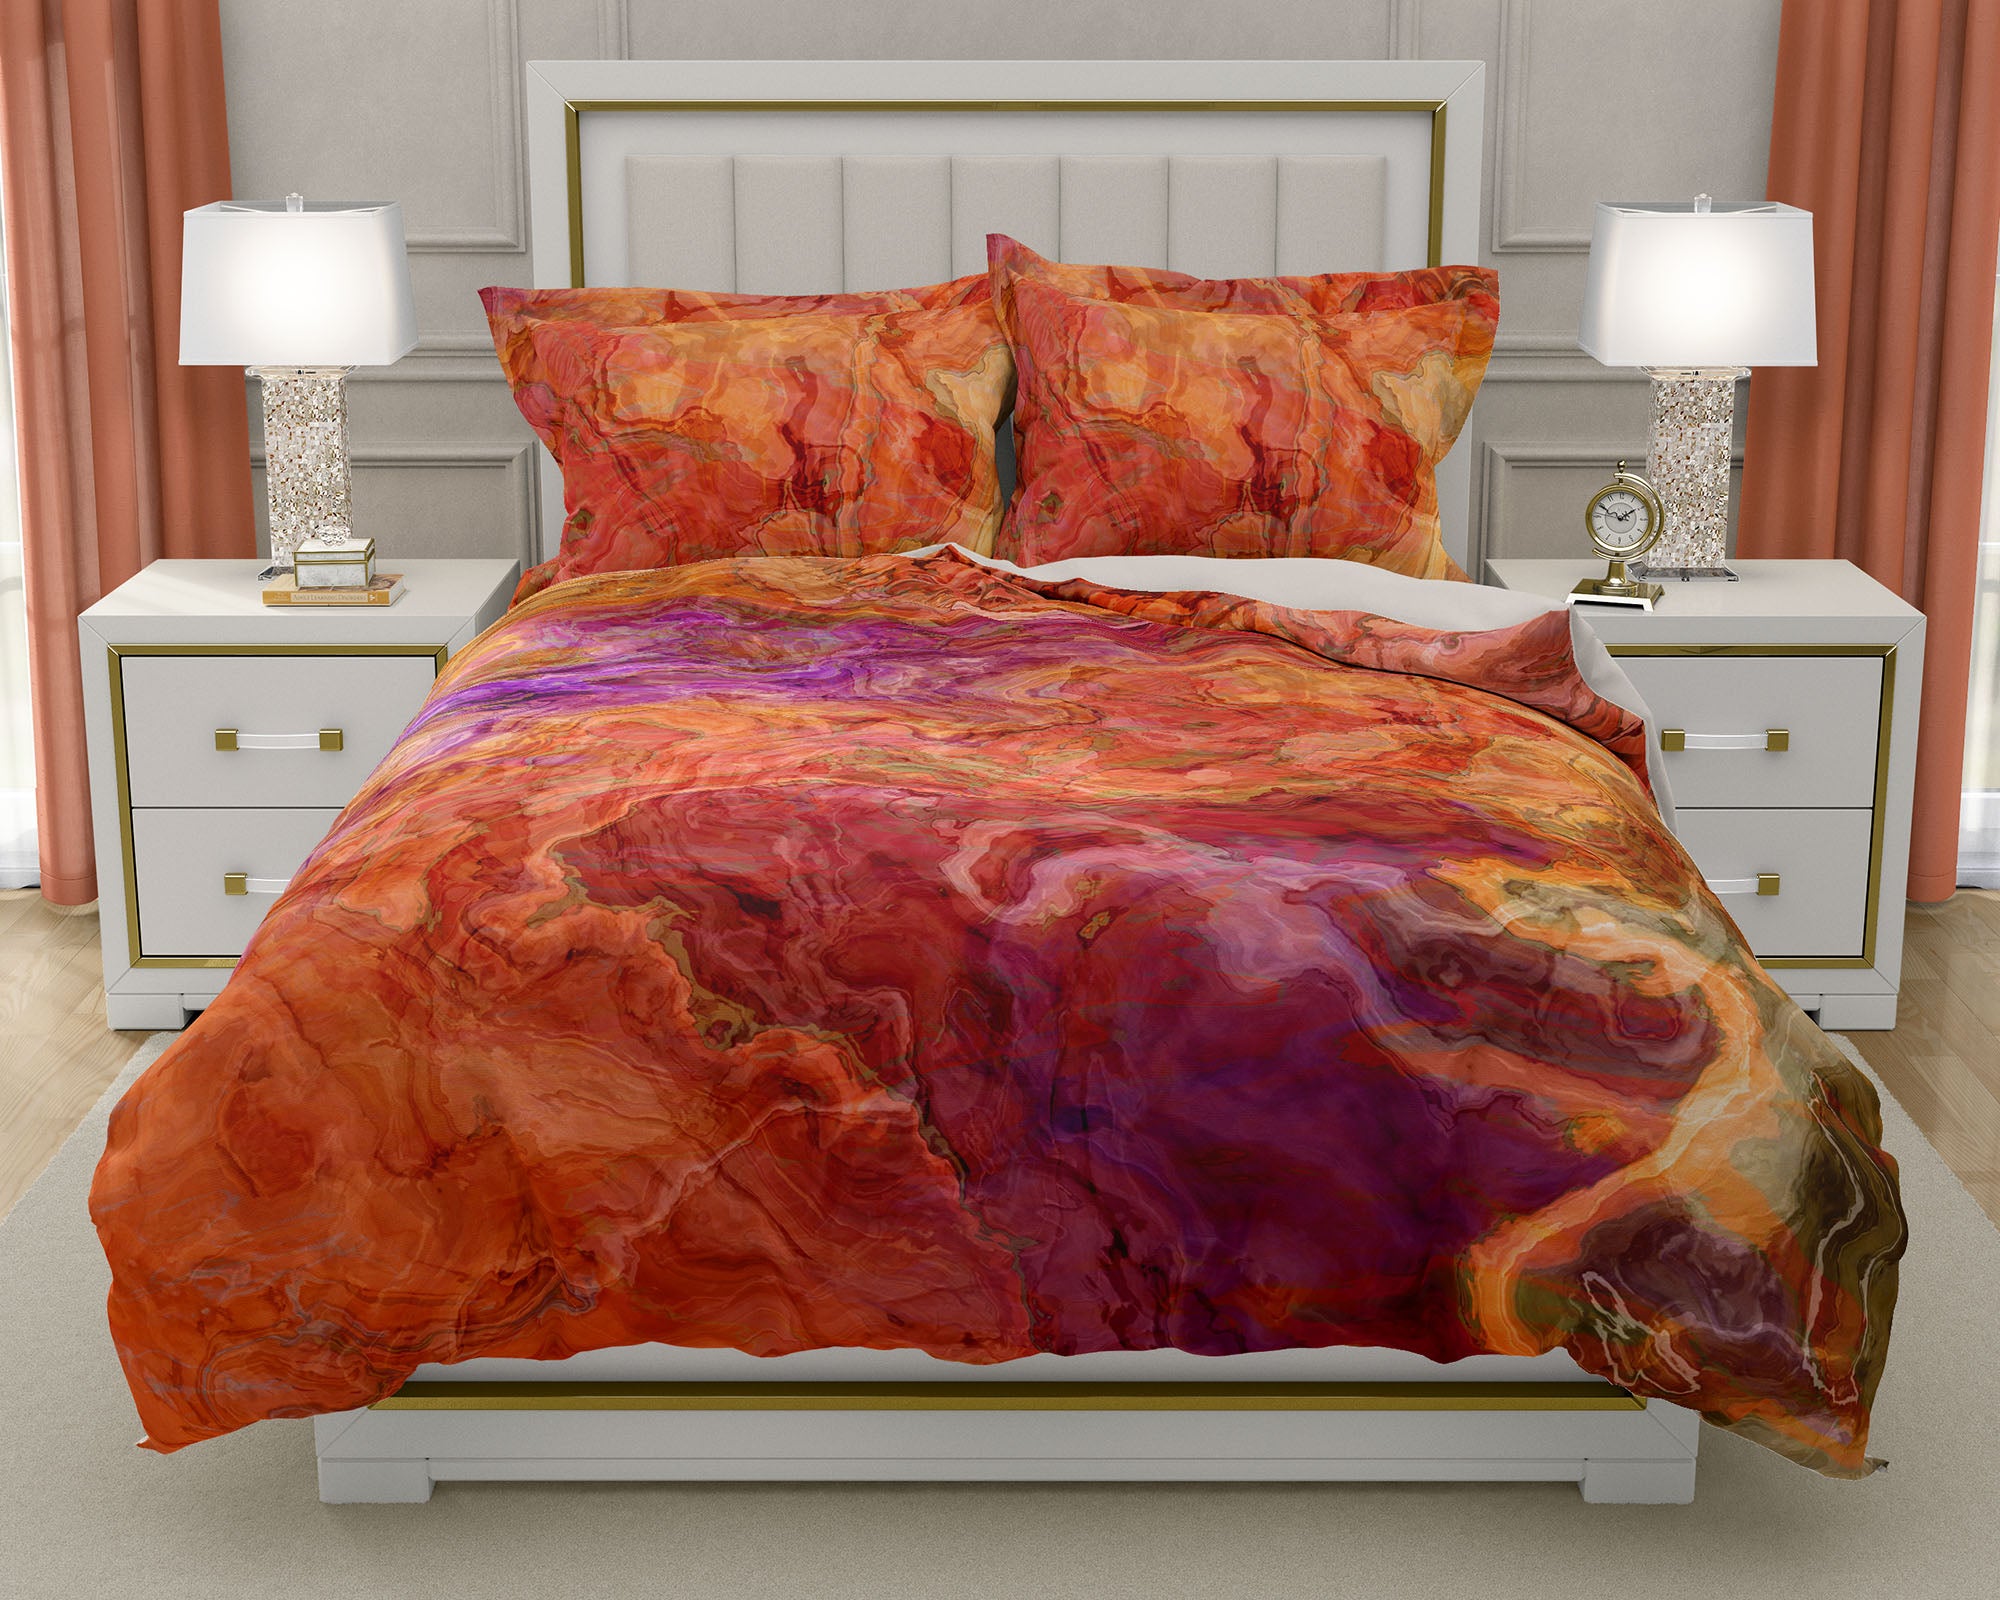 Duvet Cover With Abstract Art King Or Queen Red Orange Olive